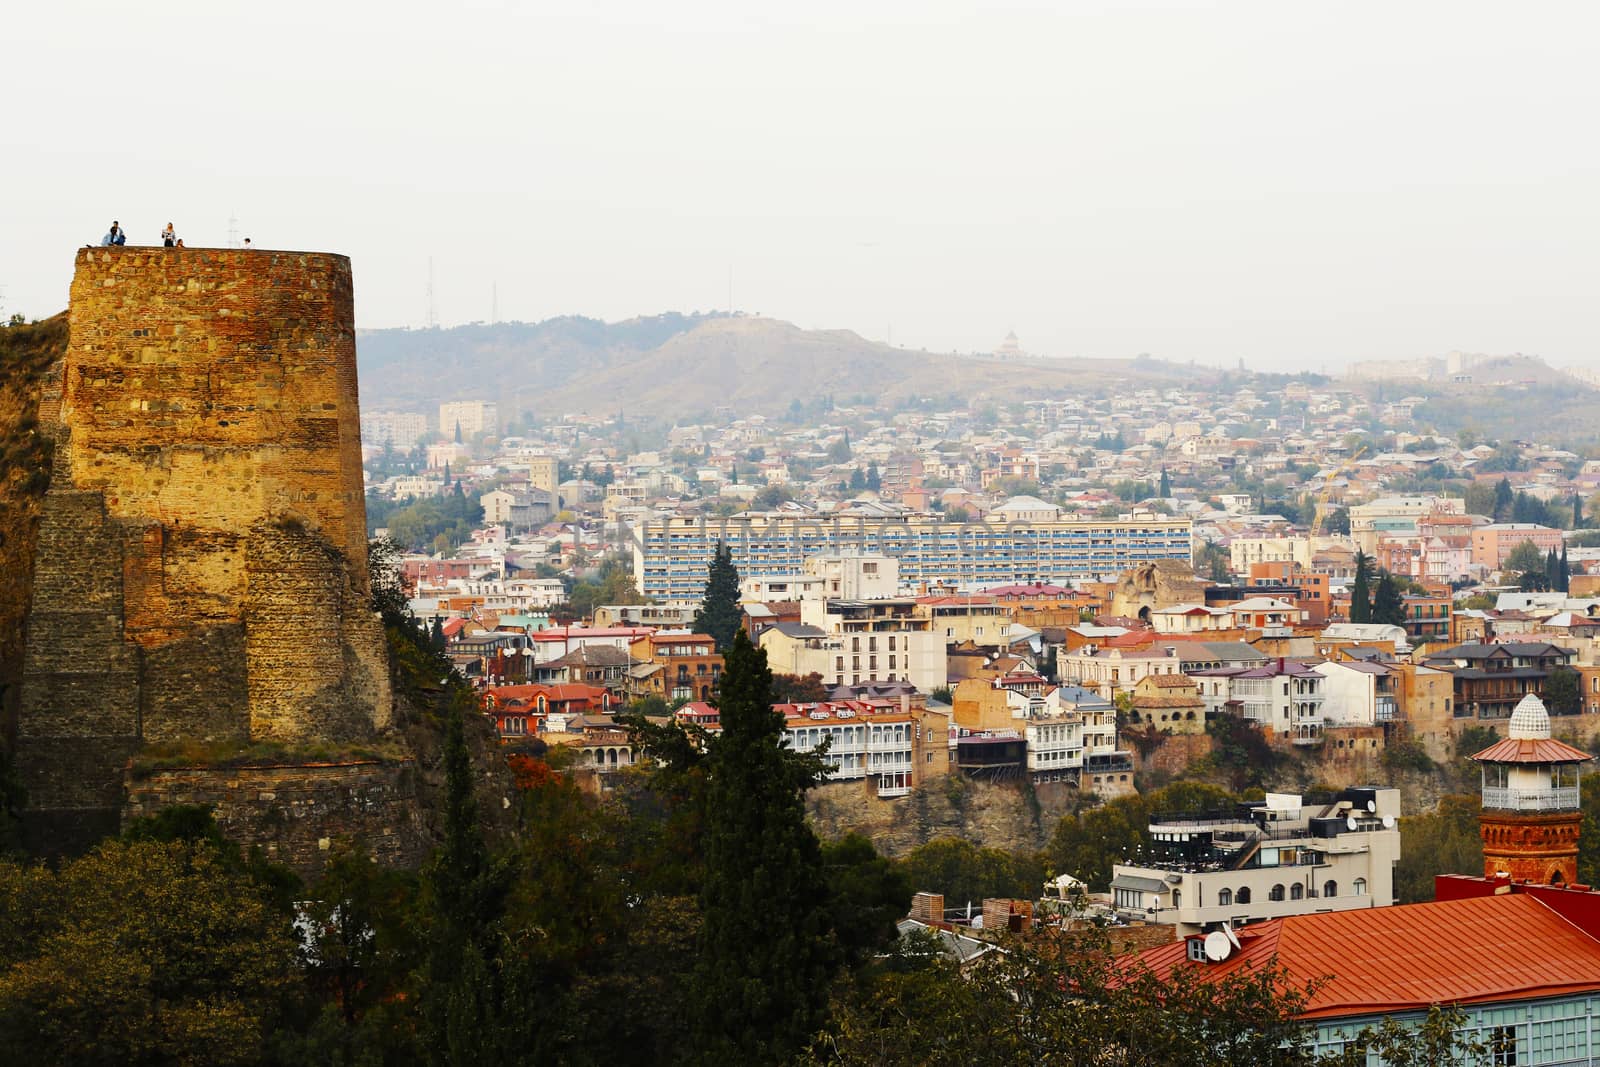 city scape and city view of Tbilisi from Tbilisi botanic garden, Georgia.